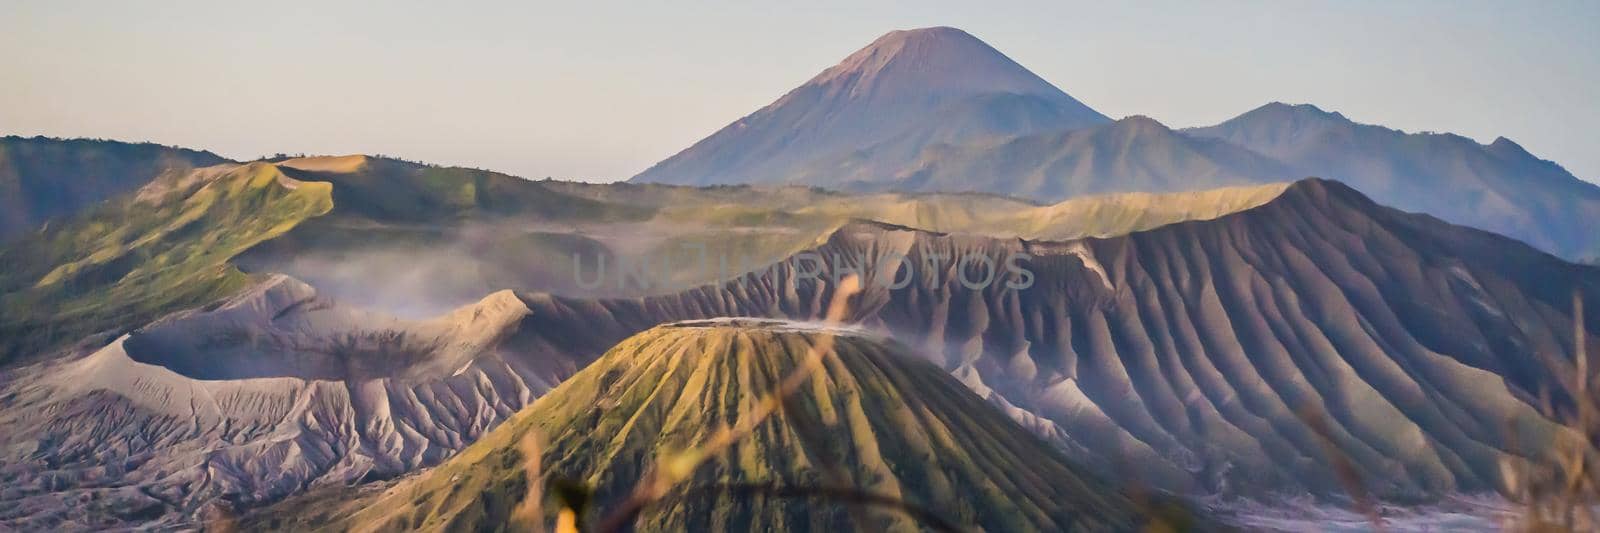 BANNER, LONG FORMAT Sunrise at the Bromo Tengger Semeru National Park on the Java Island, Indonesia. View on the Bromo or Gunung Bromo on Indonesian, Semeru and other volcanoes located inside of the Sea of Sand within the Tengger Caldera. One of the most famous volcanic objects in the world. Travel to Indonesia concept.